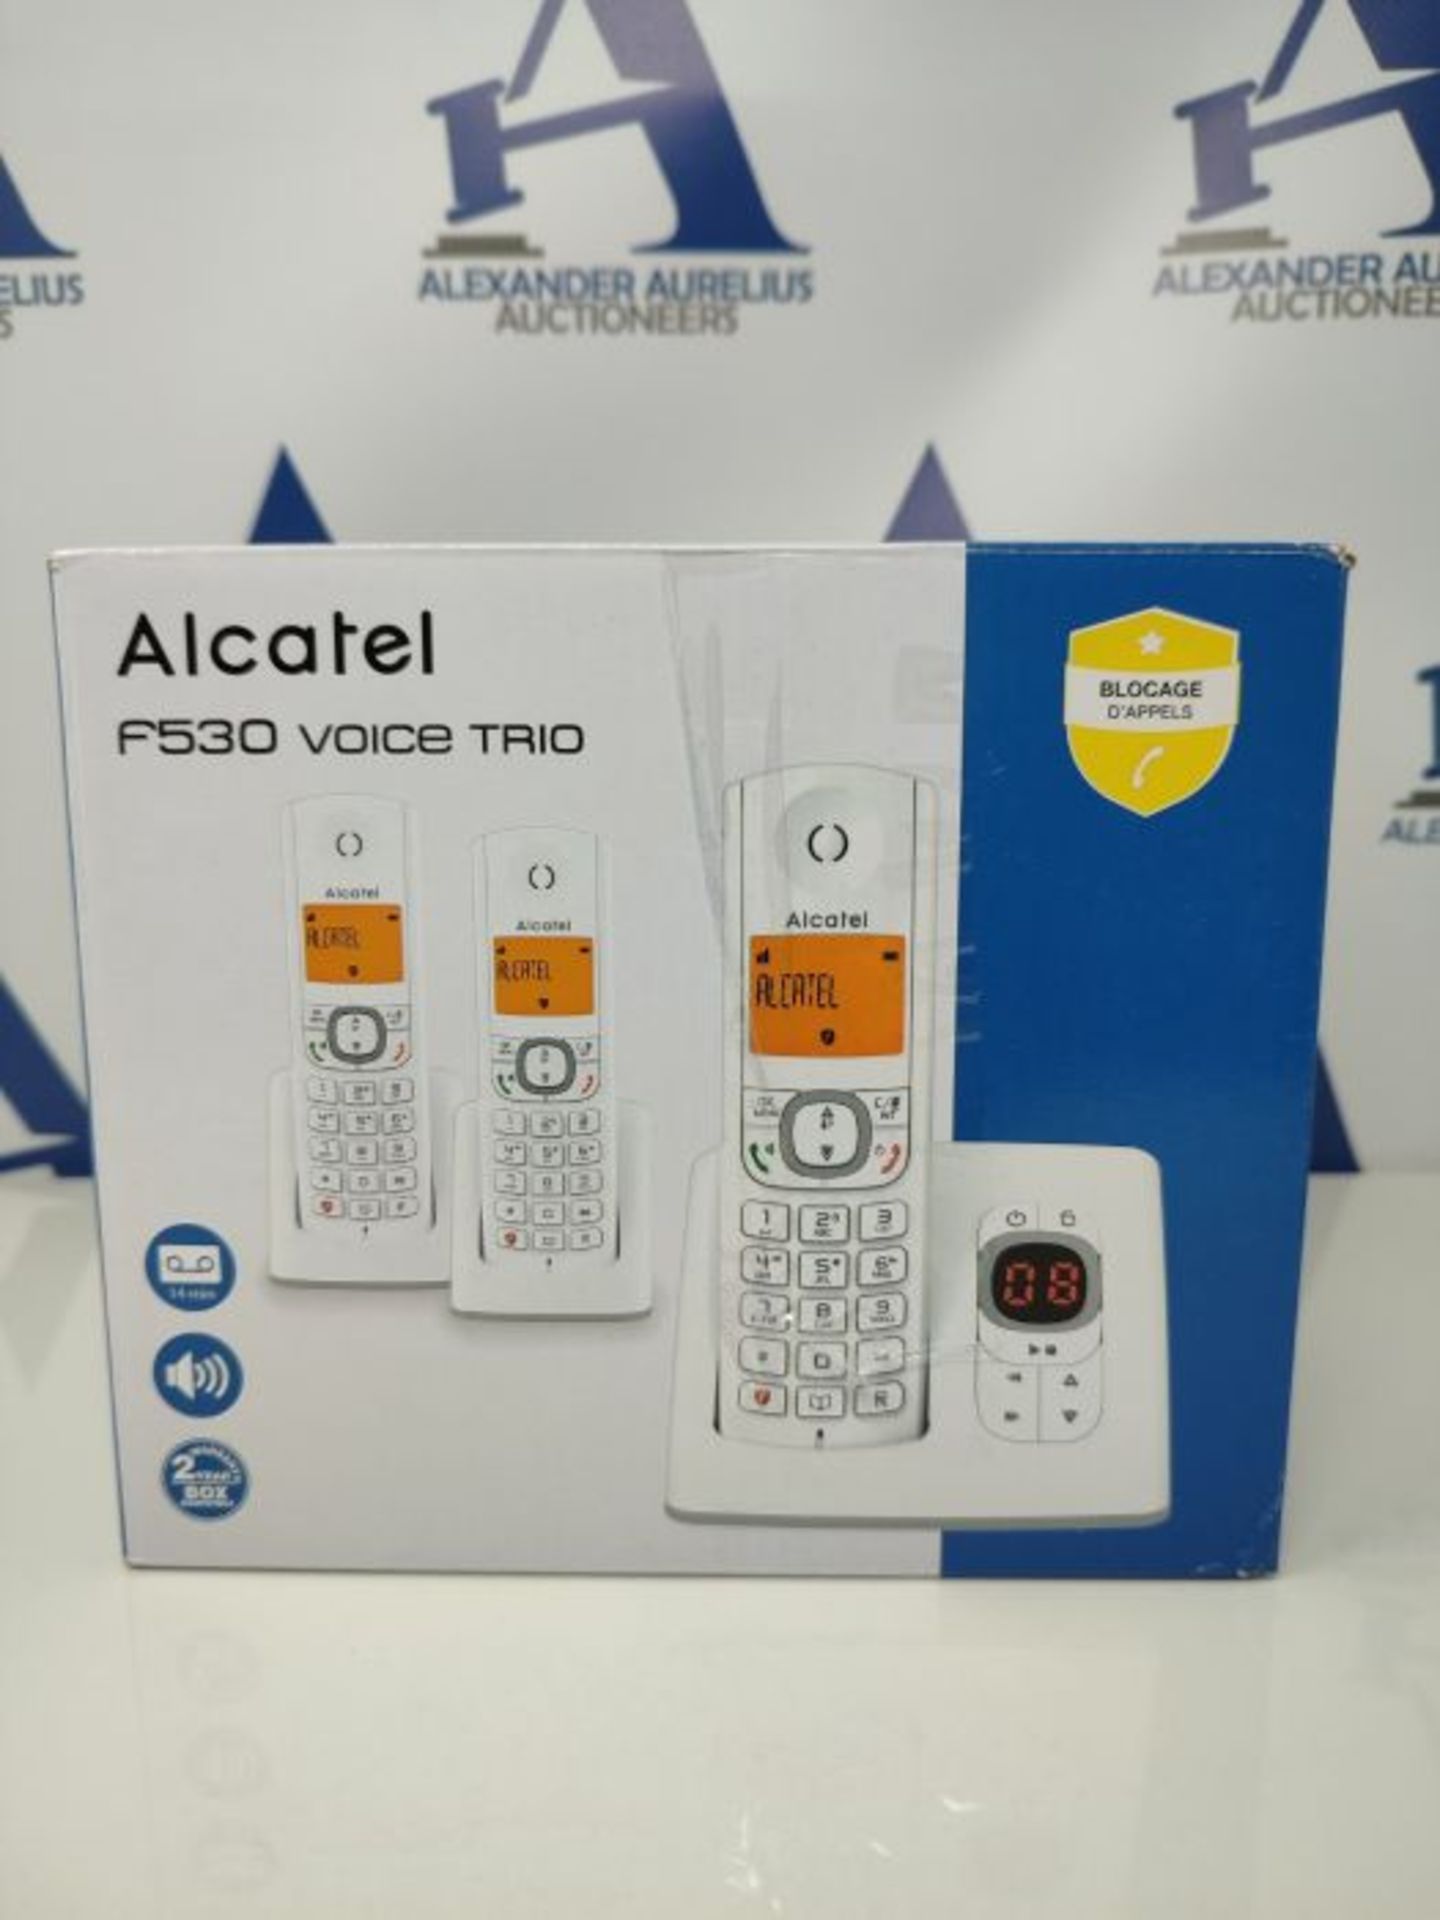 RRP £69.00 Alcatel F530 Voice TRIO Candy-Bar - Image 4 of 9